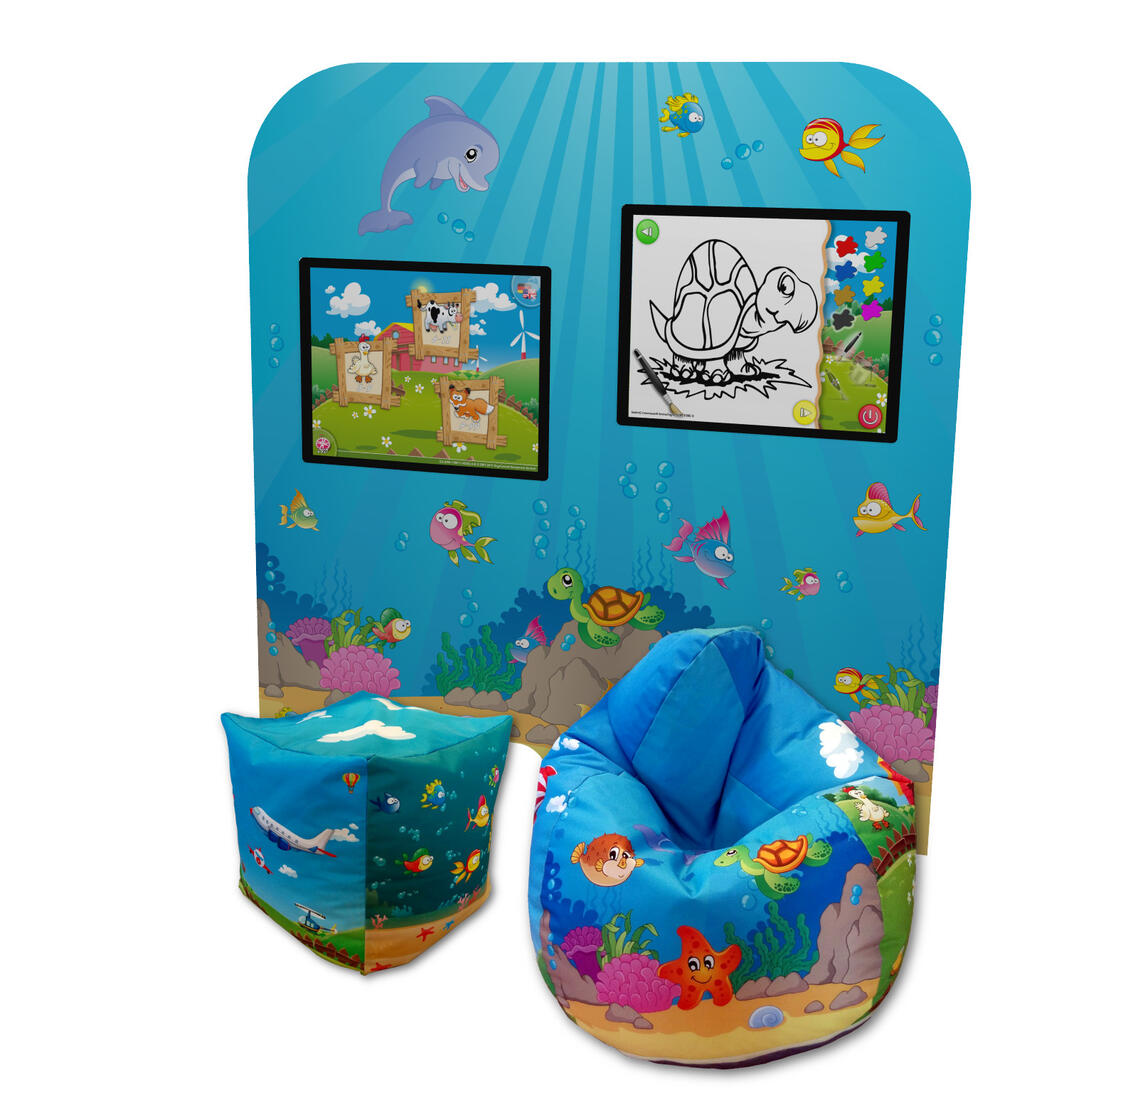 Magic Wall interactive touch screen with SeatCube and Beanbag